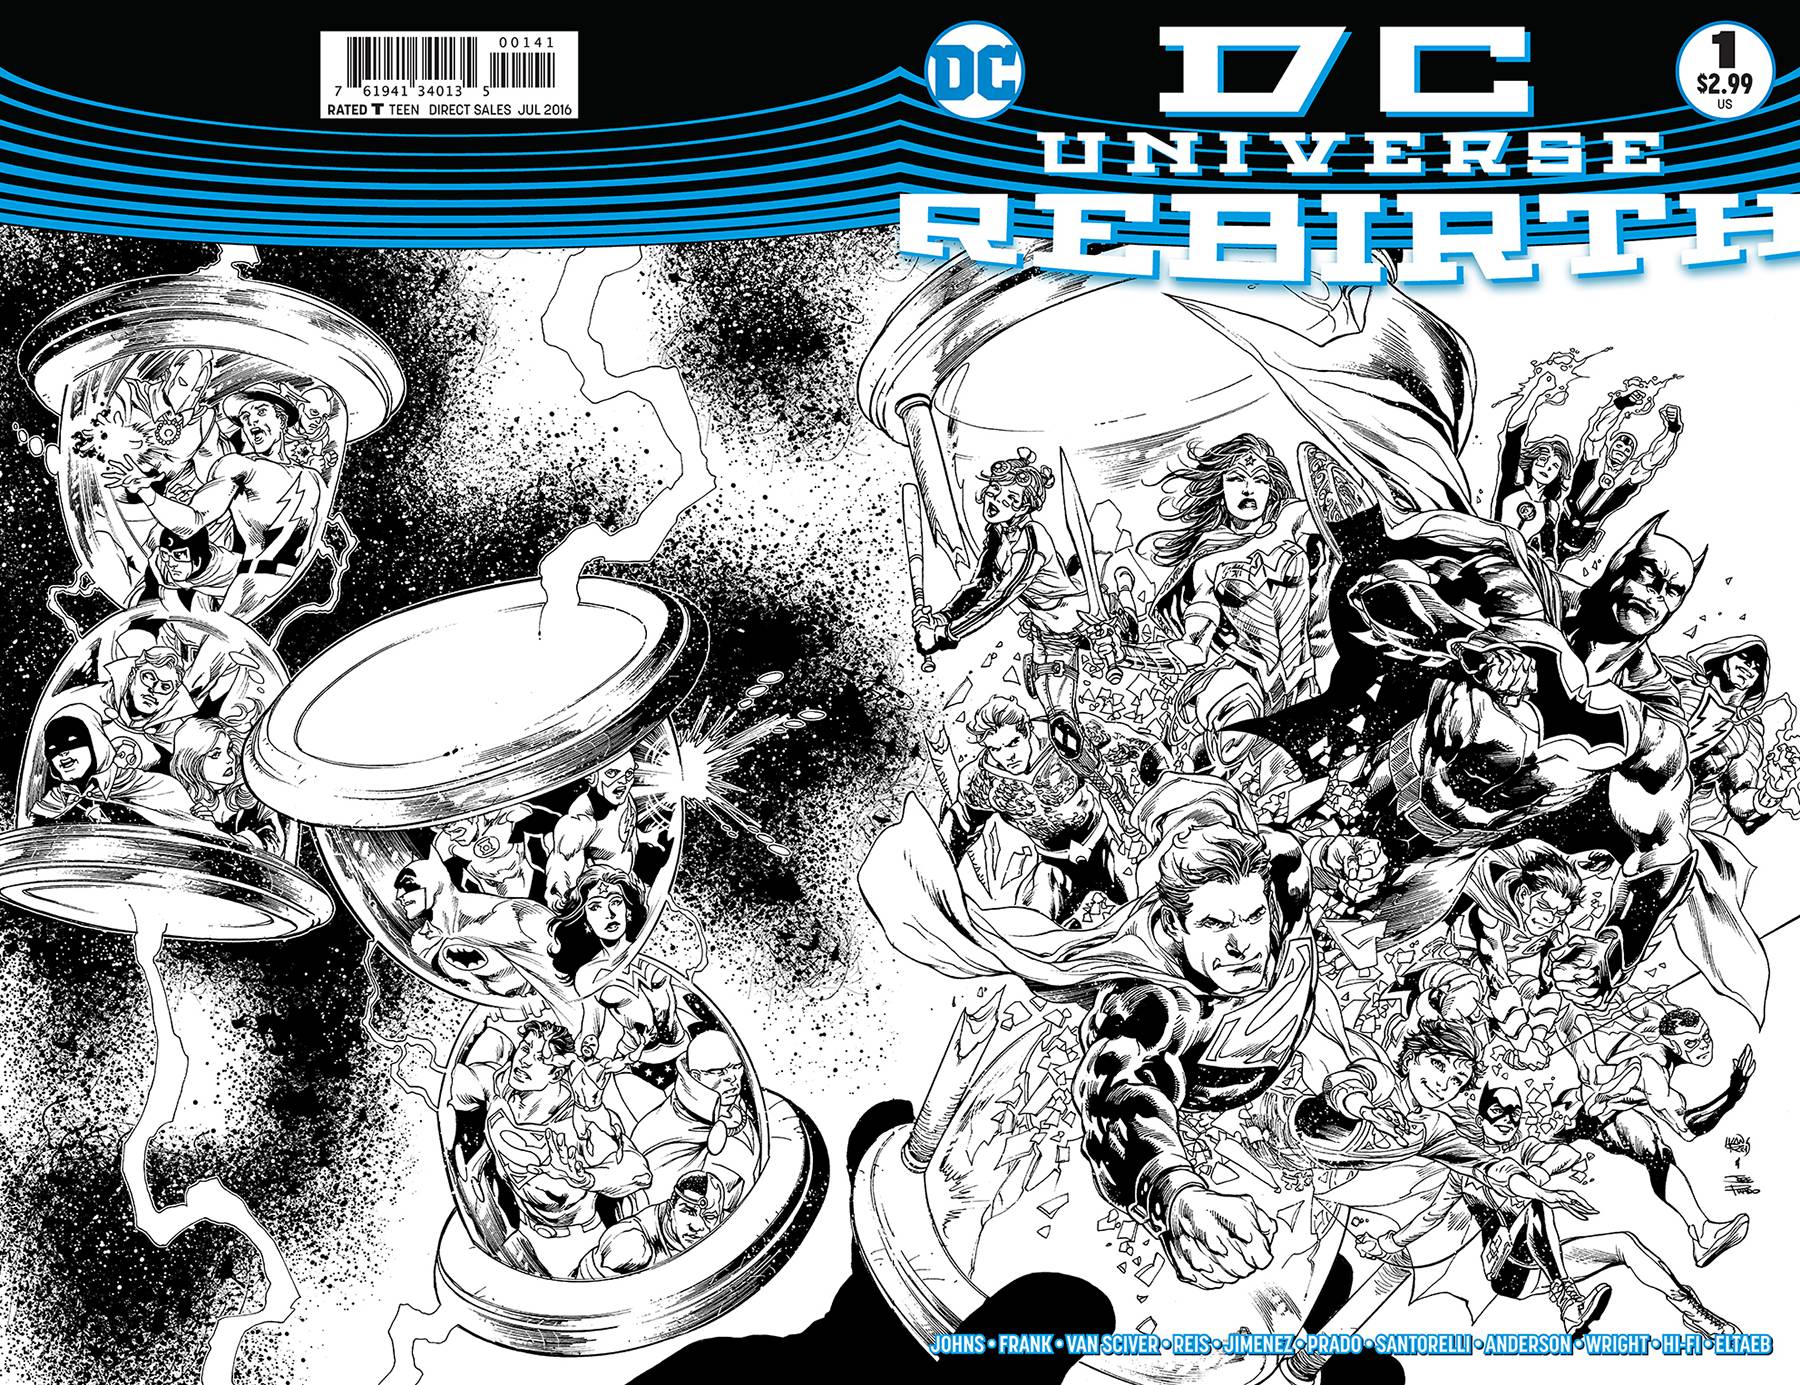 DC Universe Rebirth #1 Limited Edition Wrap-Around Variant Edition